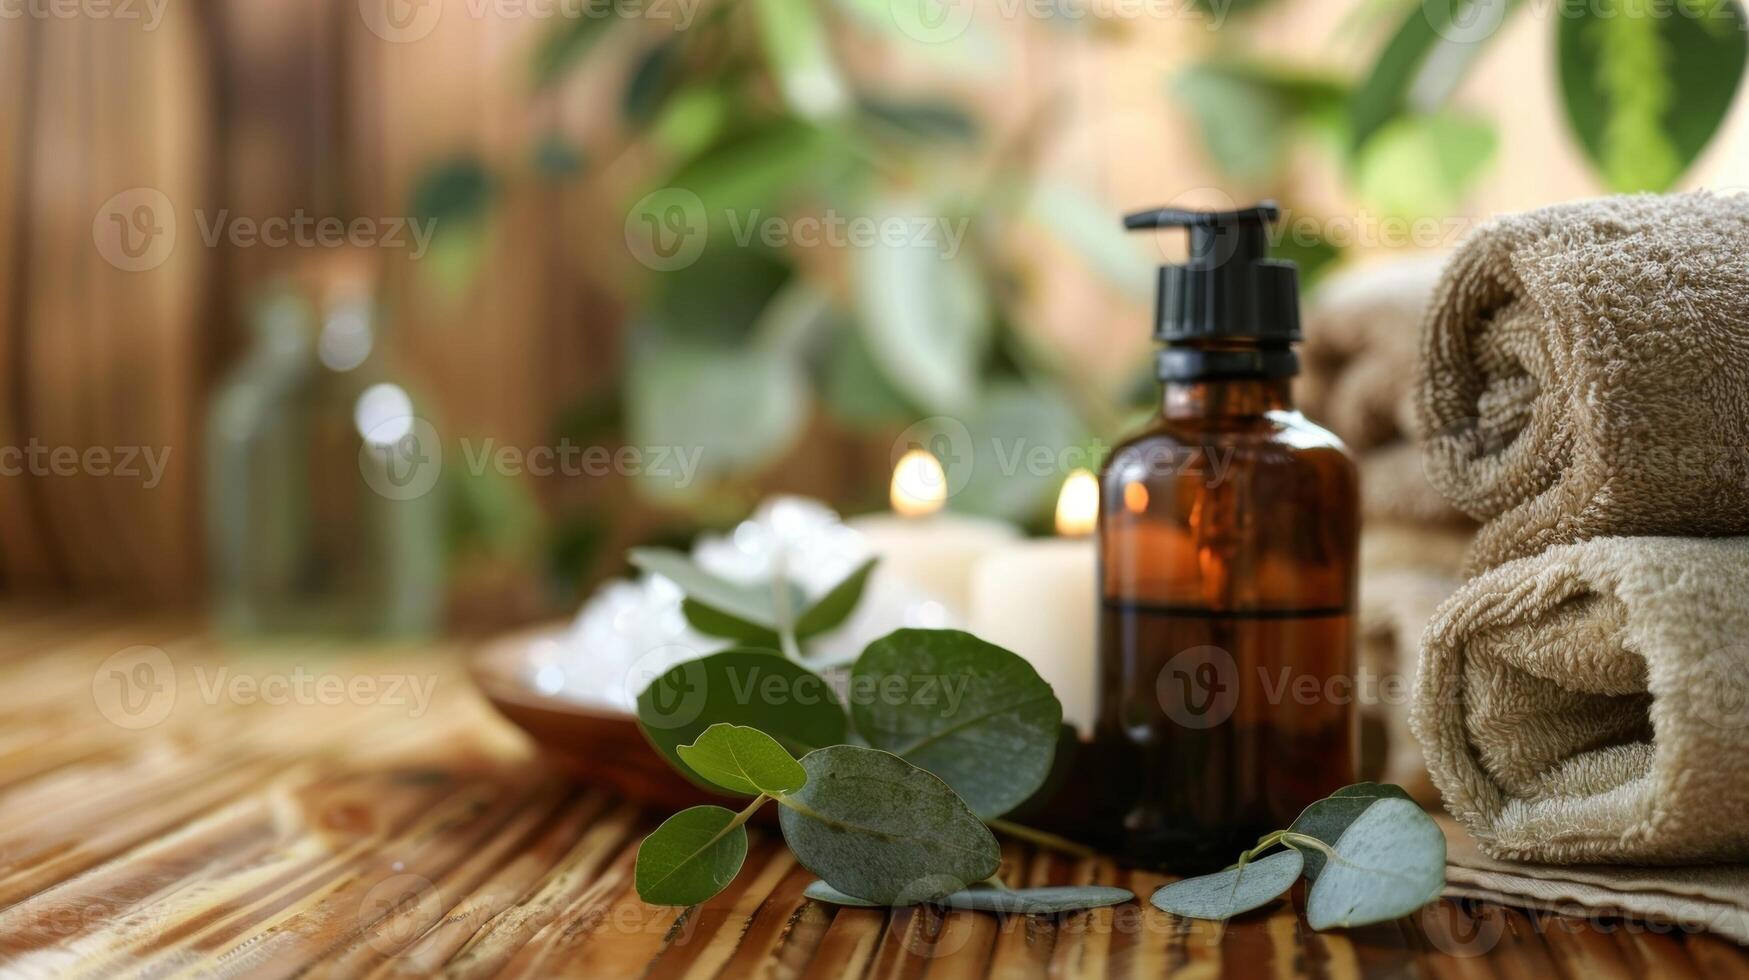 The soothing scent of eucalyptus oil diffusing in the sauna easing congestion and promoting deep breathing. photo